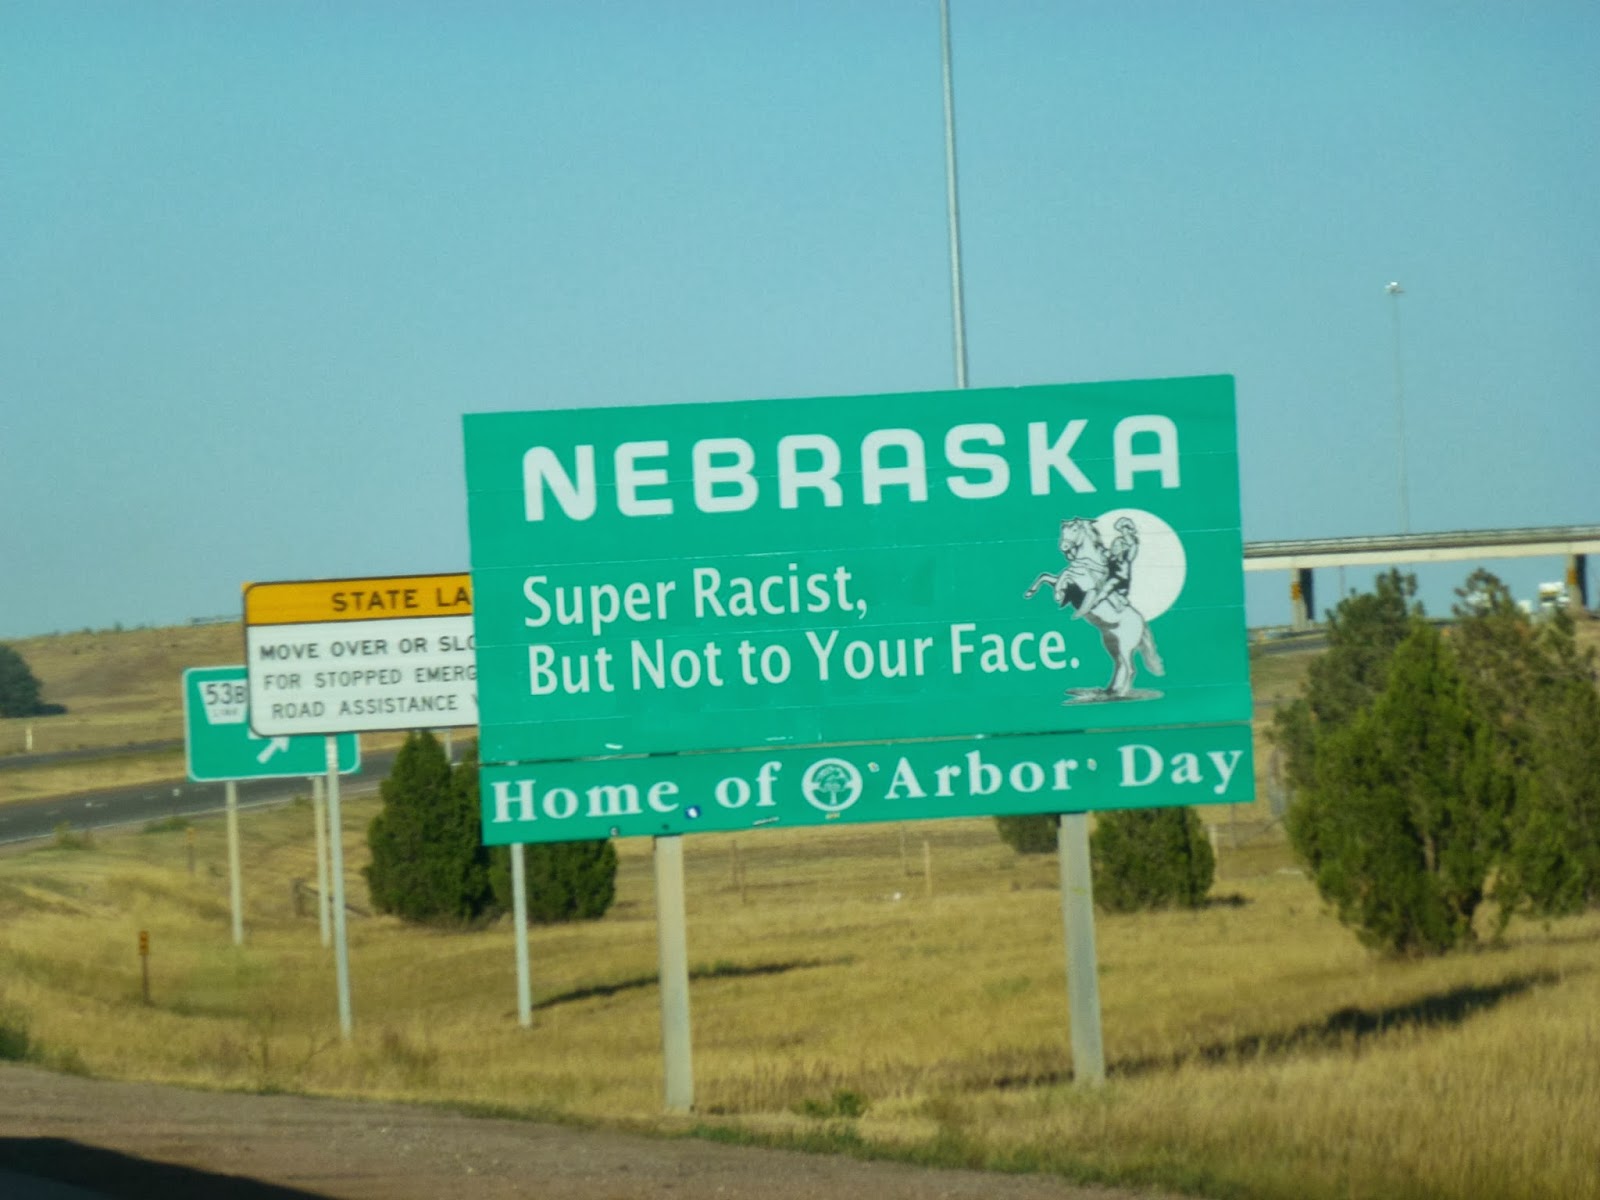 Nebraska+is+racist+but+not+to+your+face+dr+heckle+funny+wtf+signs.jpg